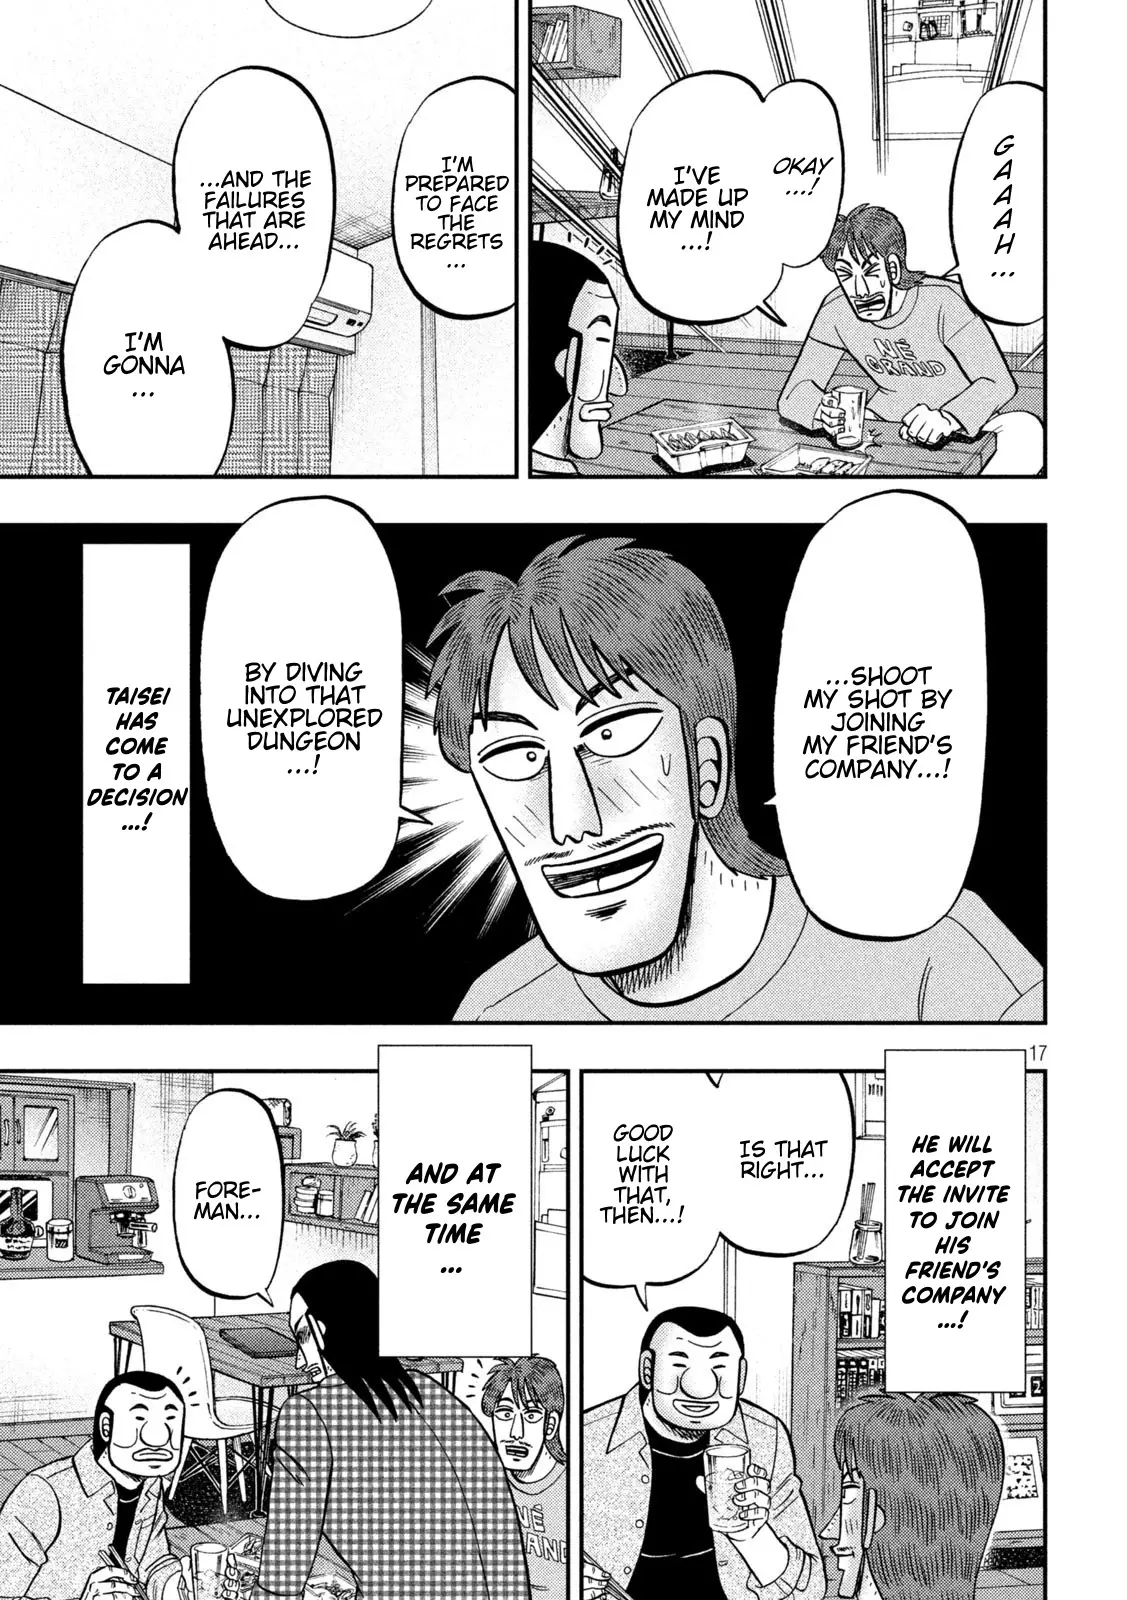 One Day Outing Foreman - 93 page 17-39999cf3